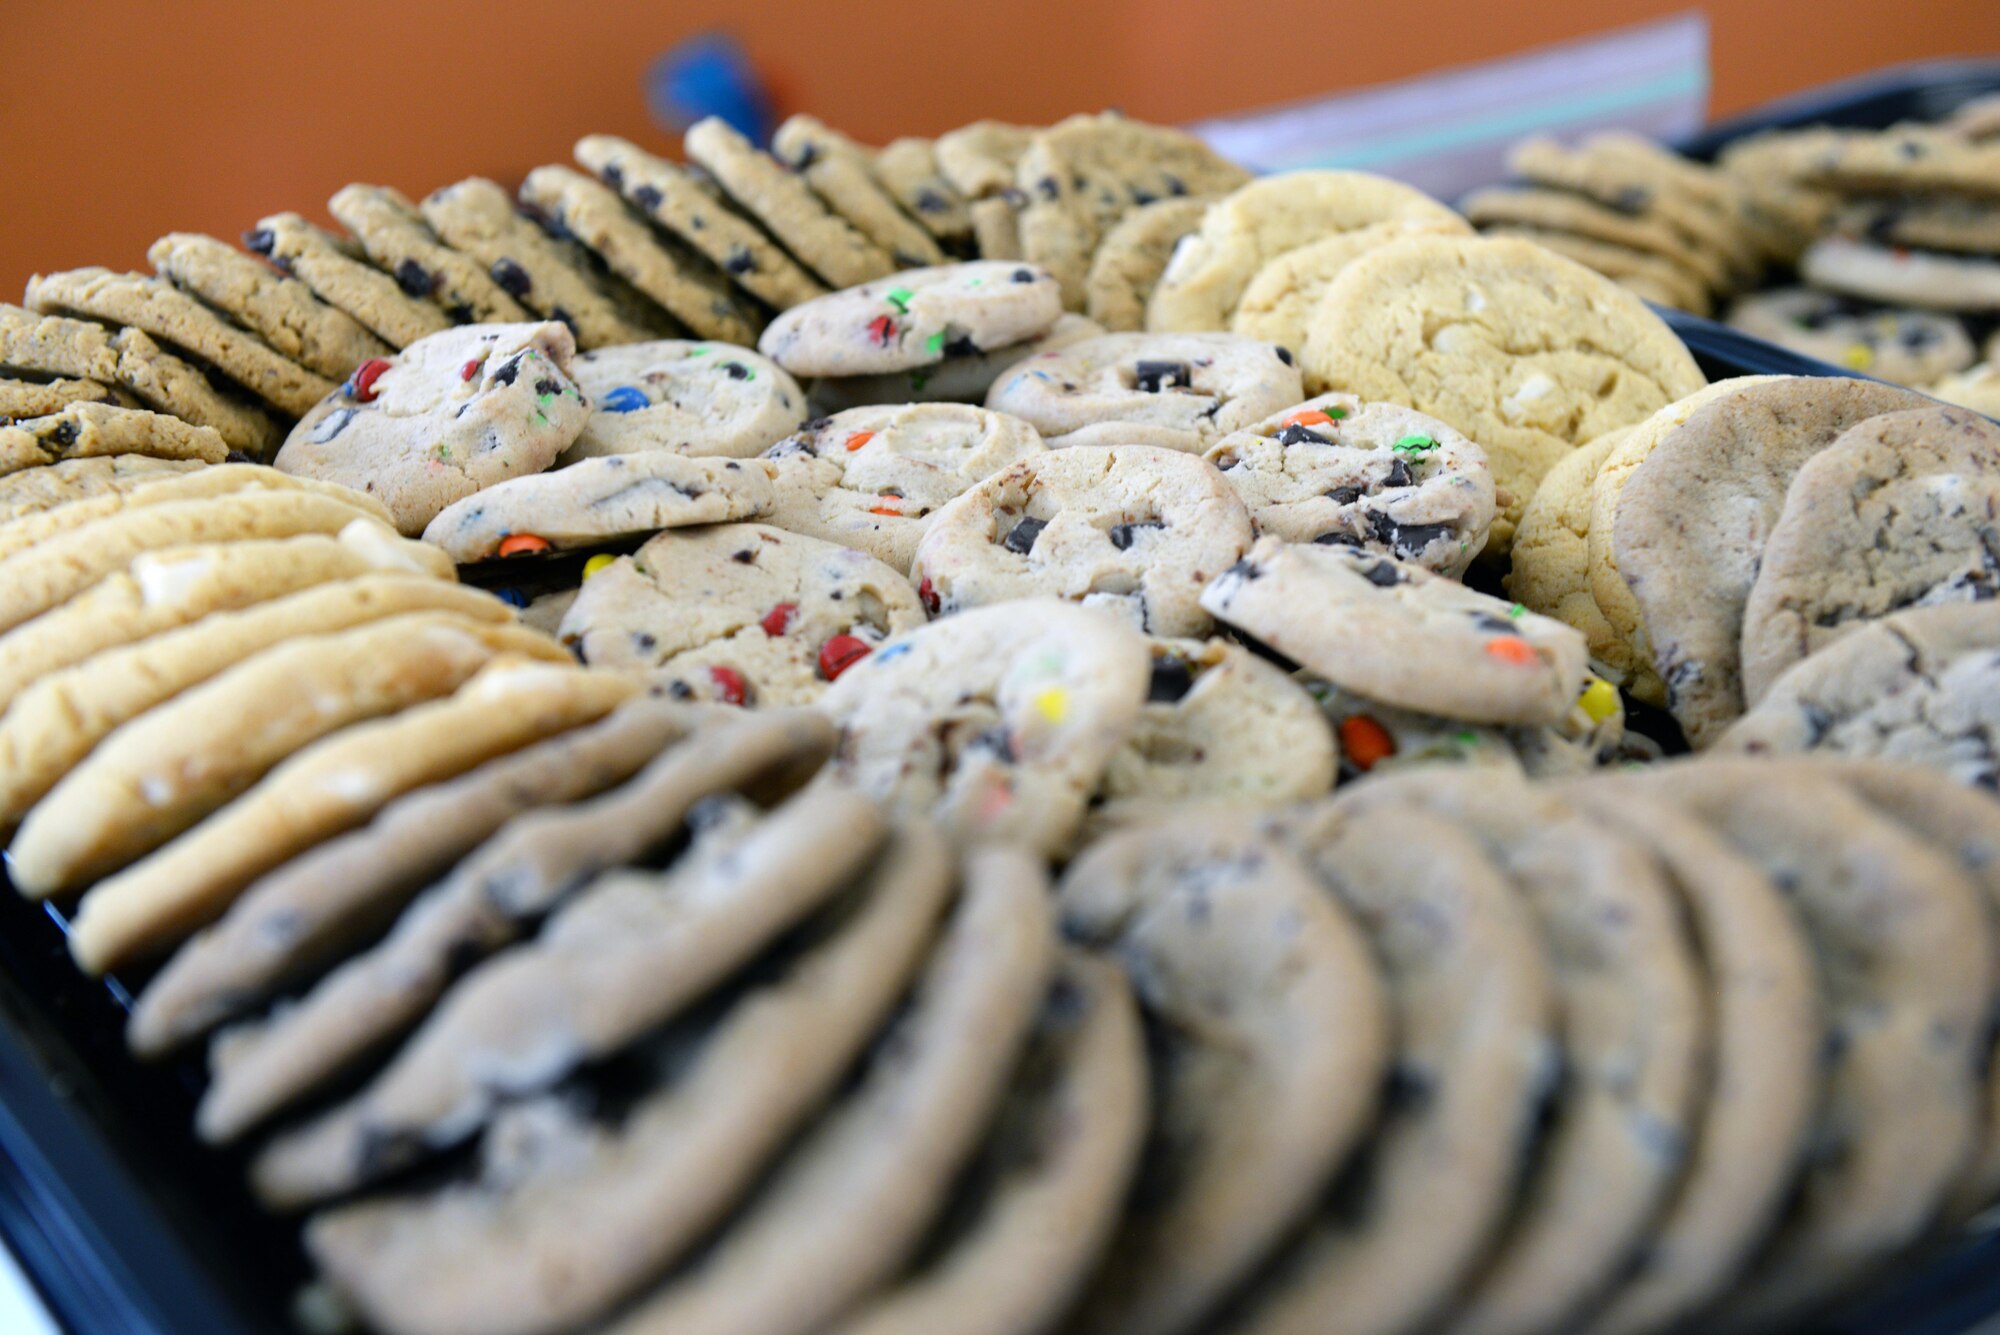 The Ellsworth Spouse’s Club arranges homemade and store-bought cookies for the Cookie Drive at Ellsworth Air Force Base, S.D., Dec. 9, 2019. The Club received roughly $277 in monetary donations and packaged more than 12,000 cookies, spreading holiday cheer to more than 700 dormitory single Airmen. (U.S. Air Force photo by Airman Quentin K. Marx)